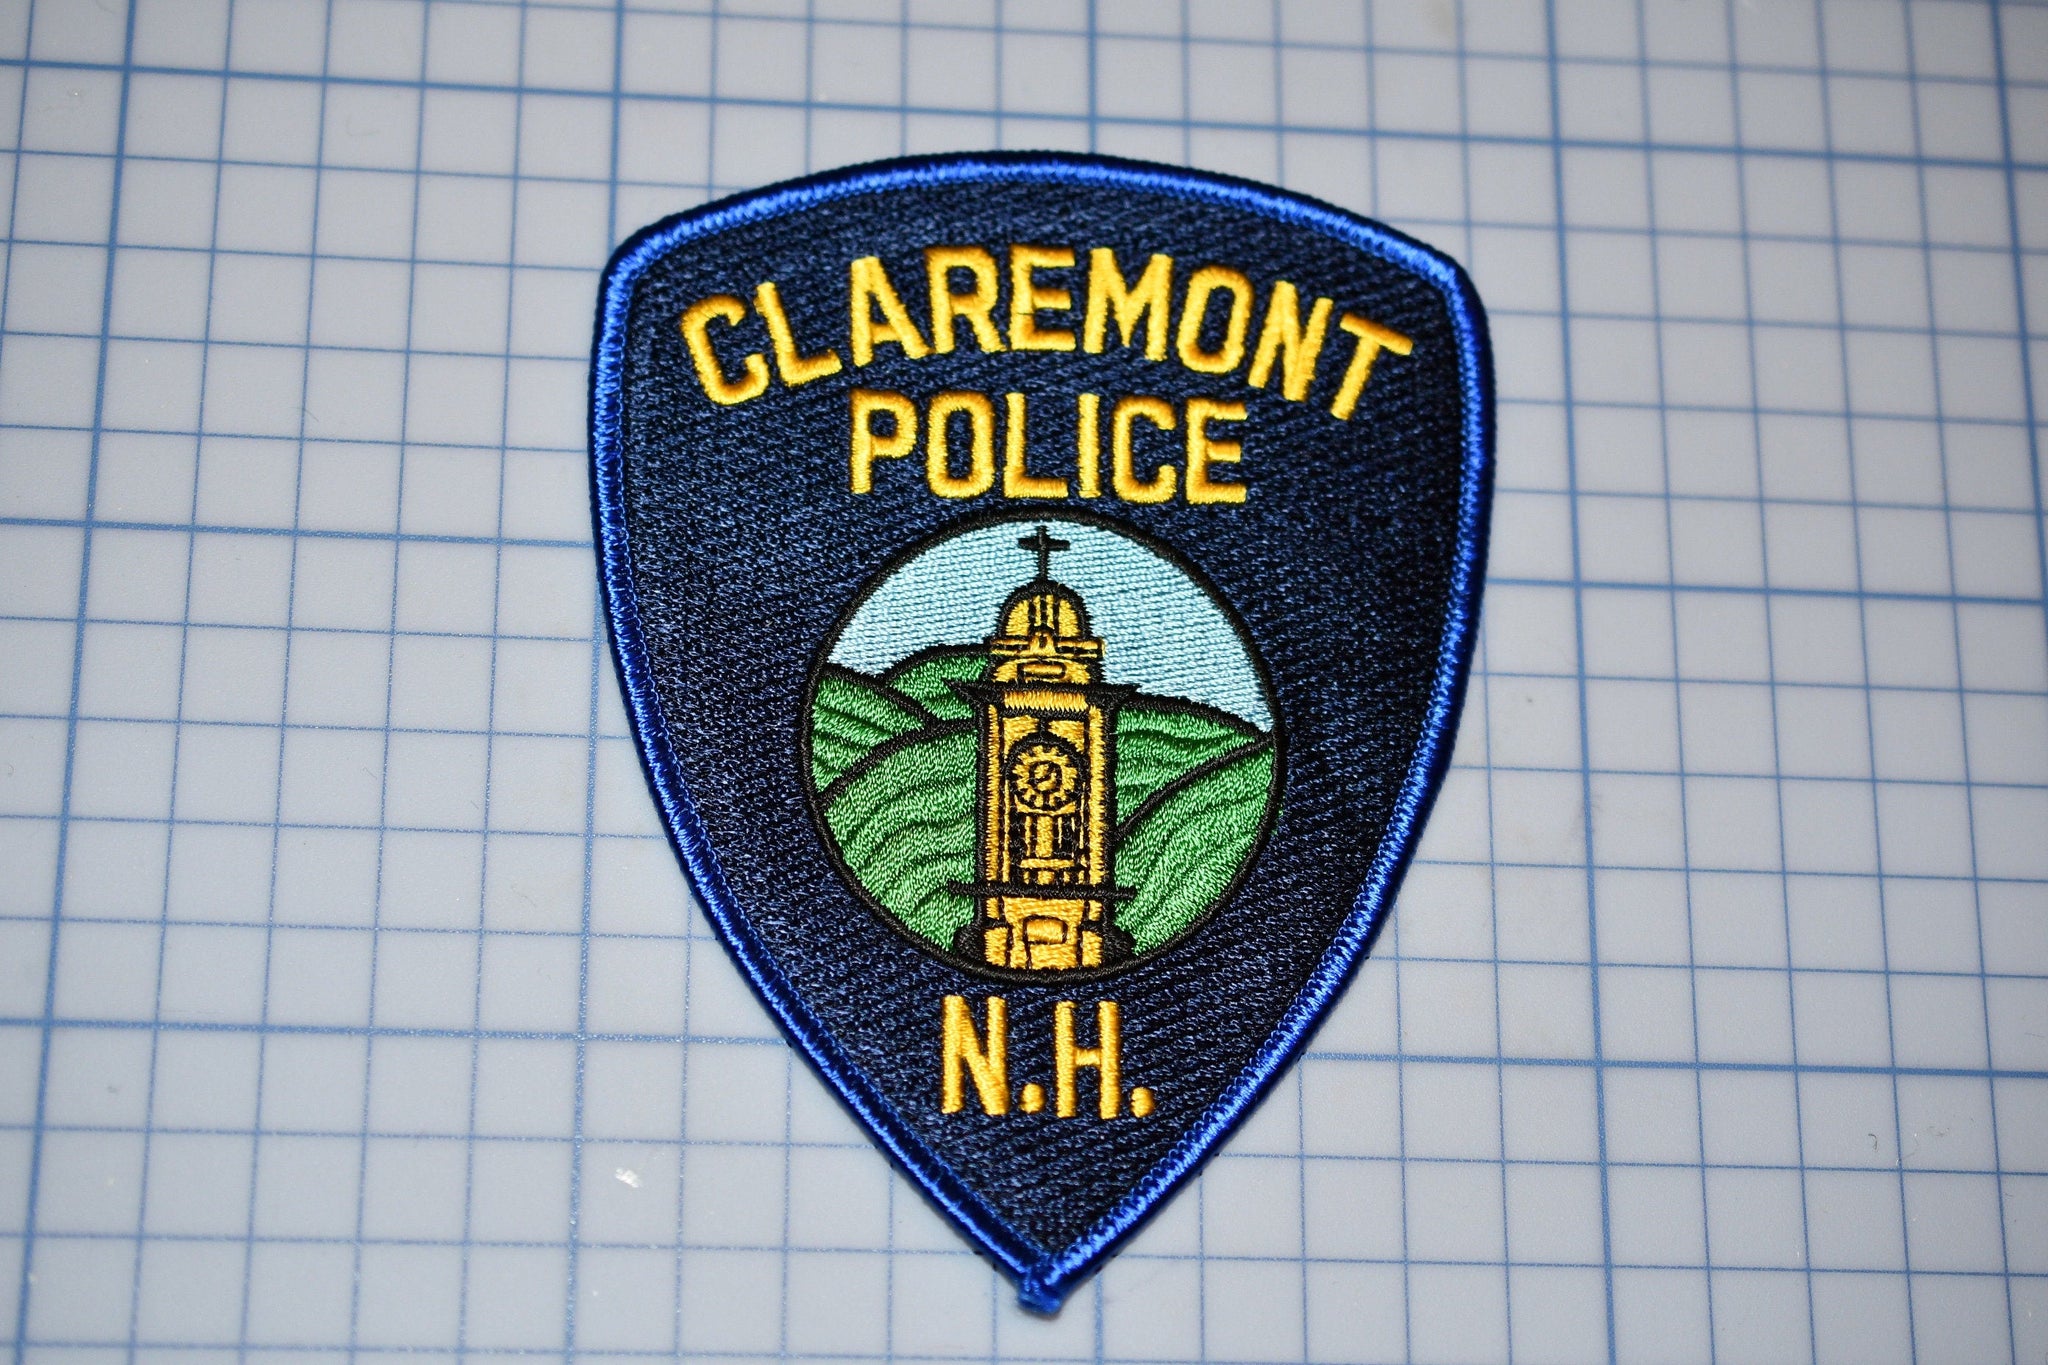 Claremont New Hampshire Police Patch (S4-290)